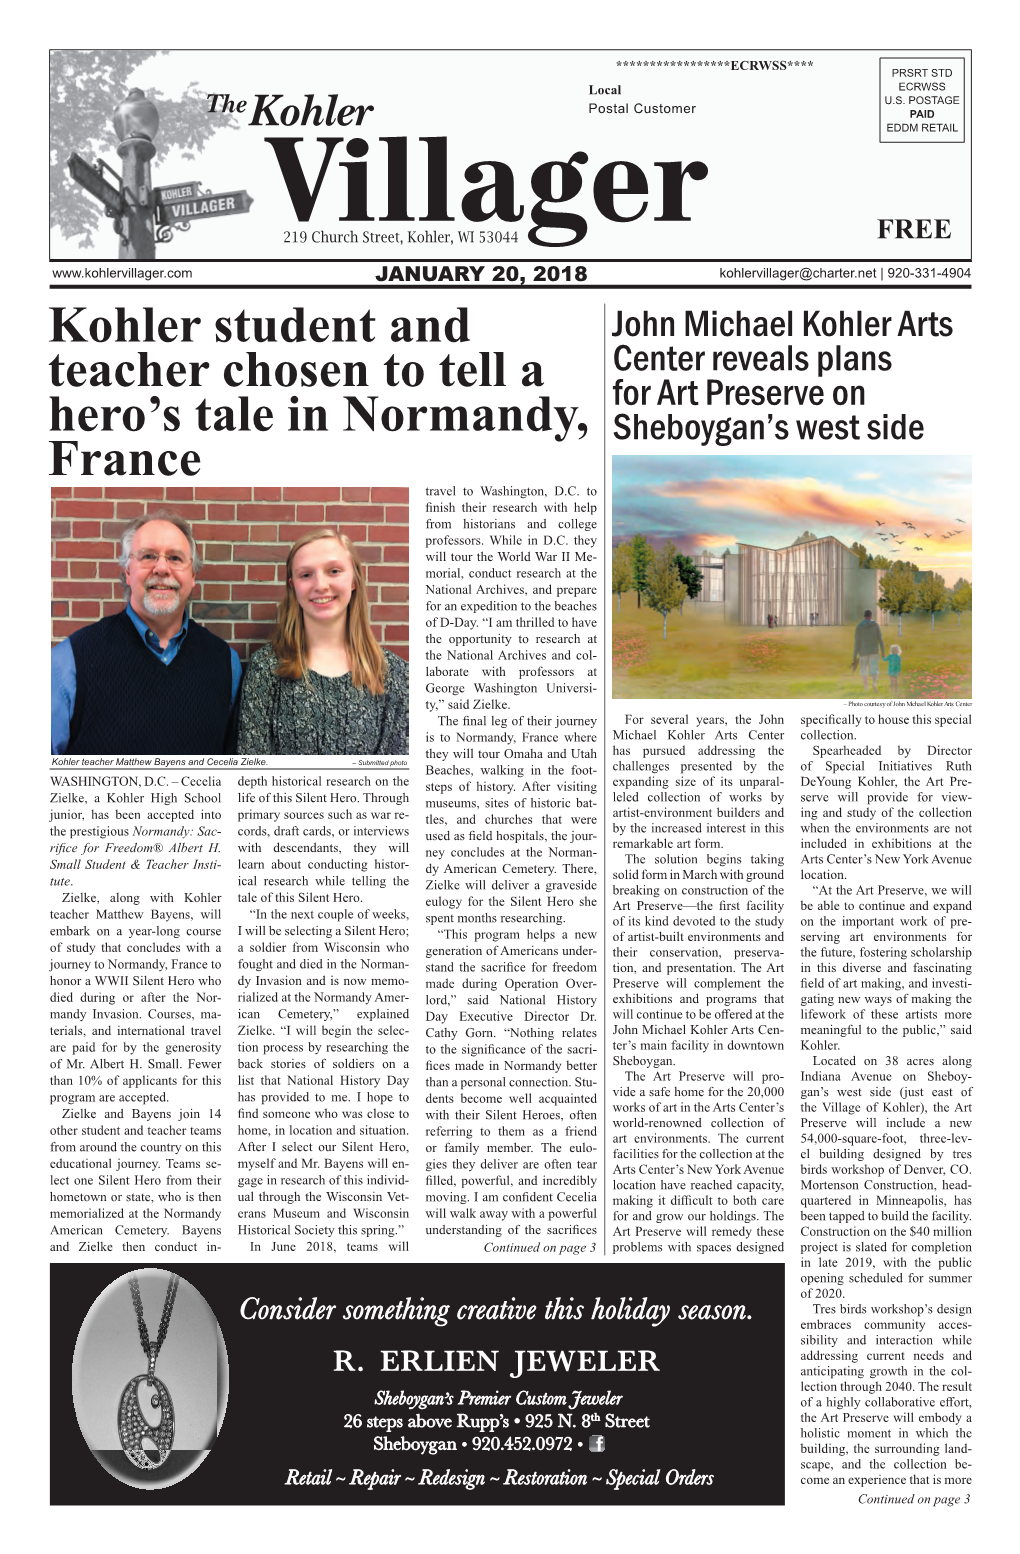 Kohler Student and Teacher Chosen to Tell a Hero's Tale in Normandy, France